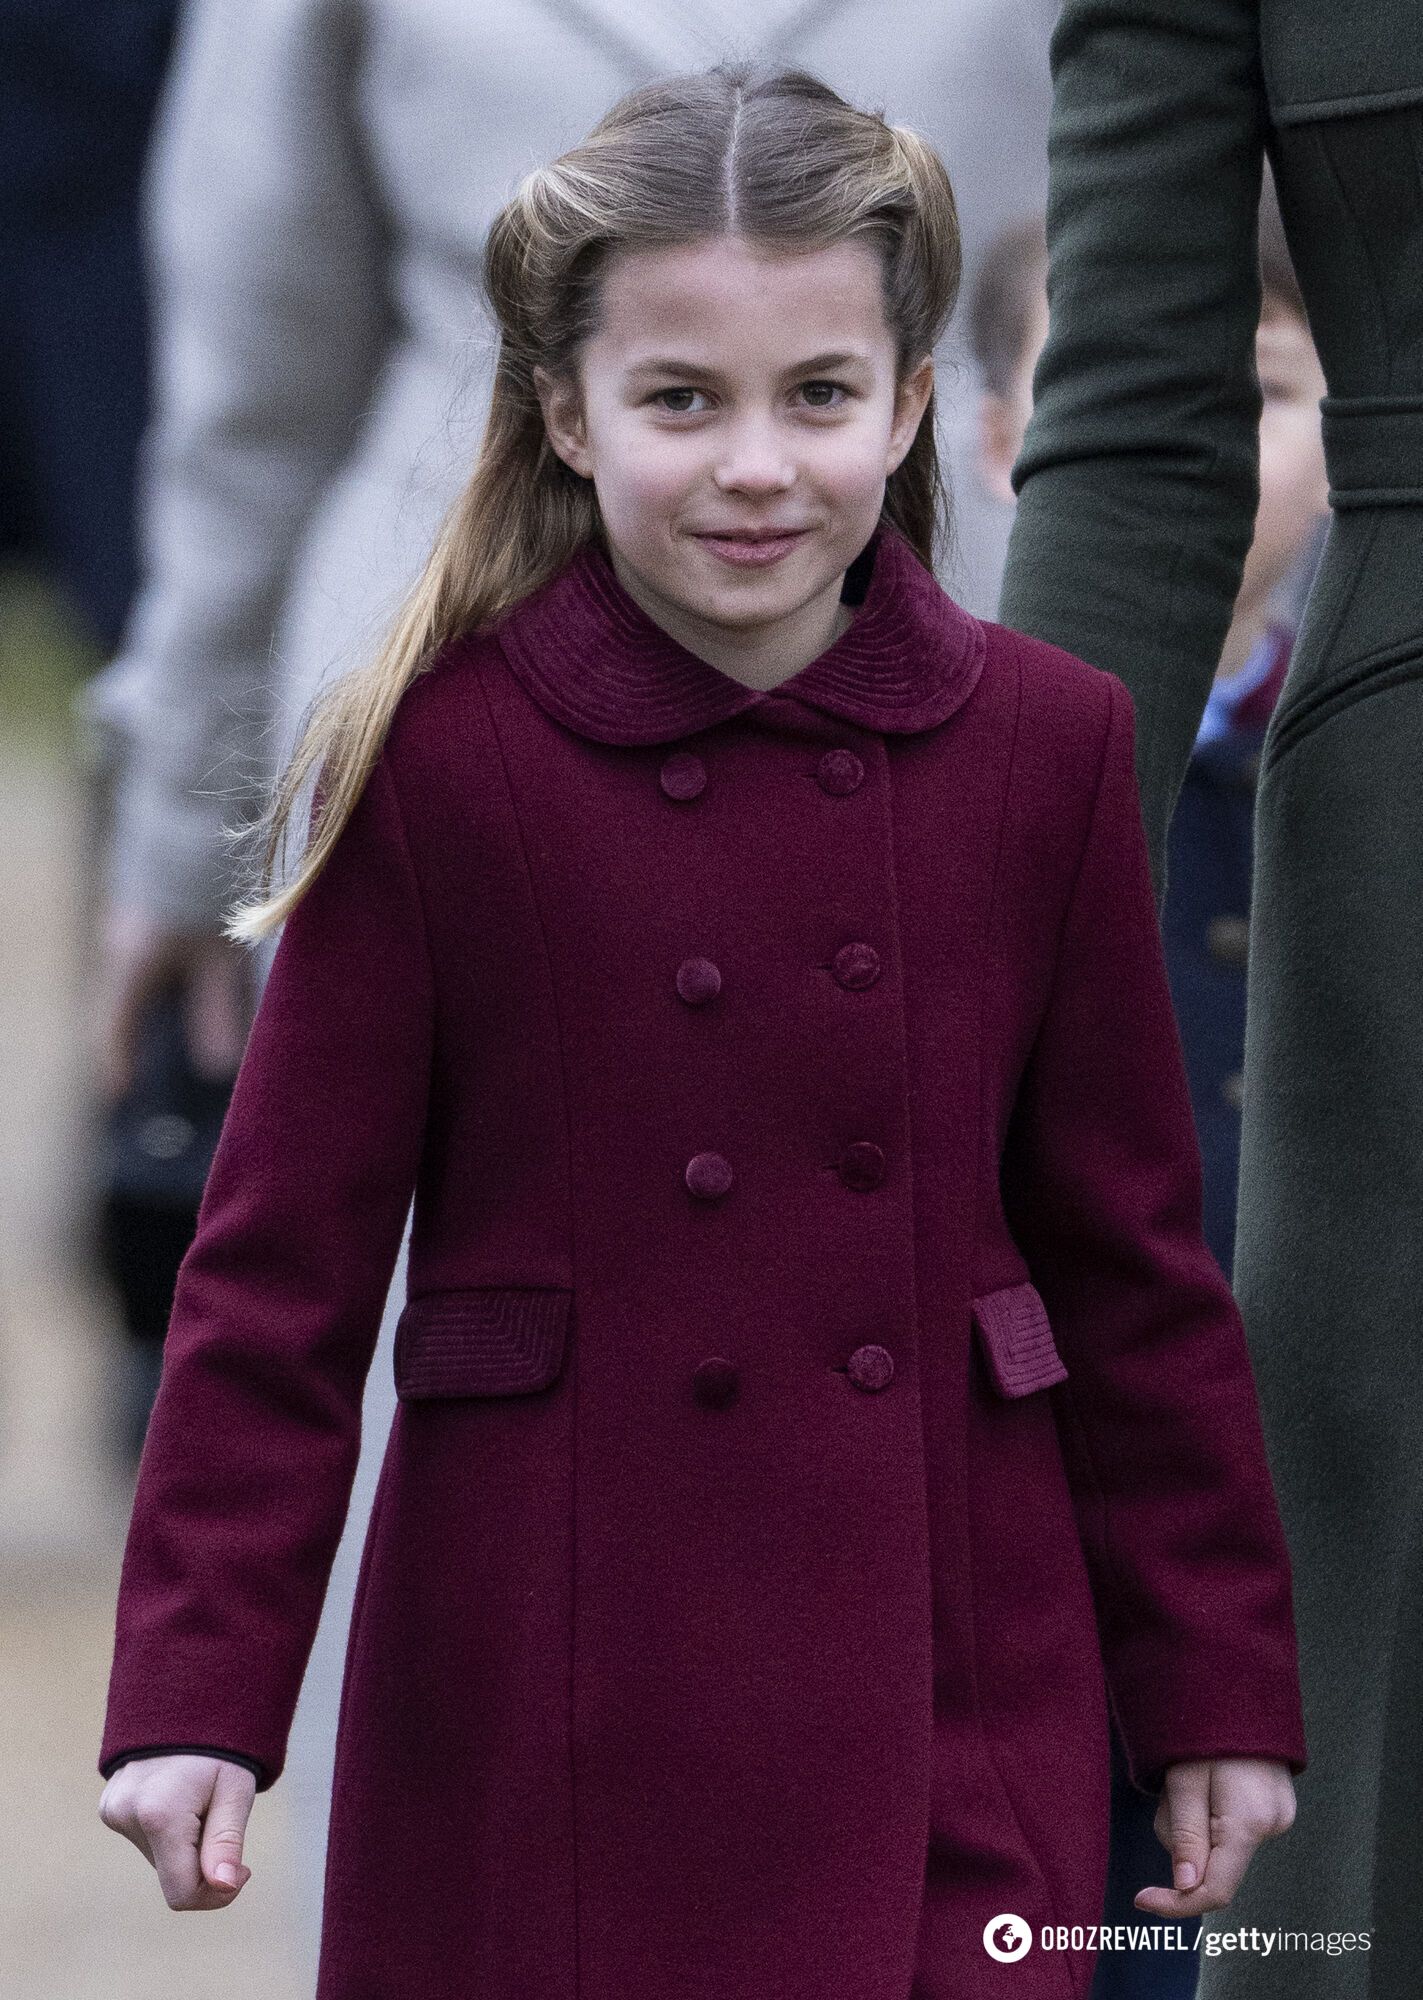 Princess Charlotte, 8, is the richest child in the world: who else is on the list of ''little rich'' and how much is their wealth estimated